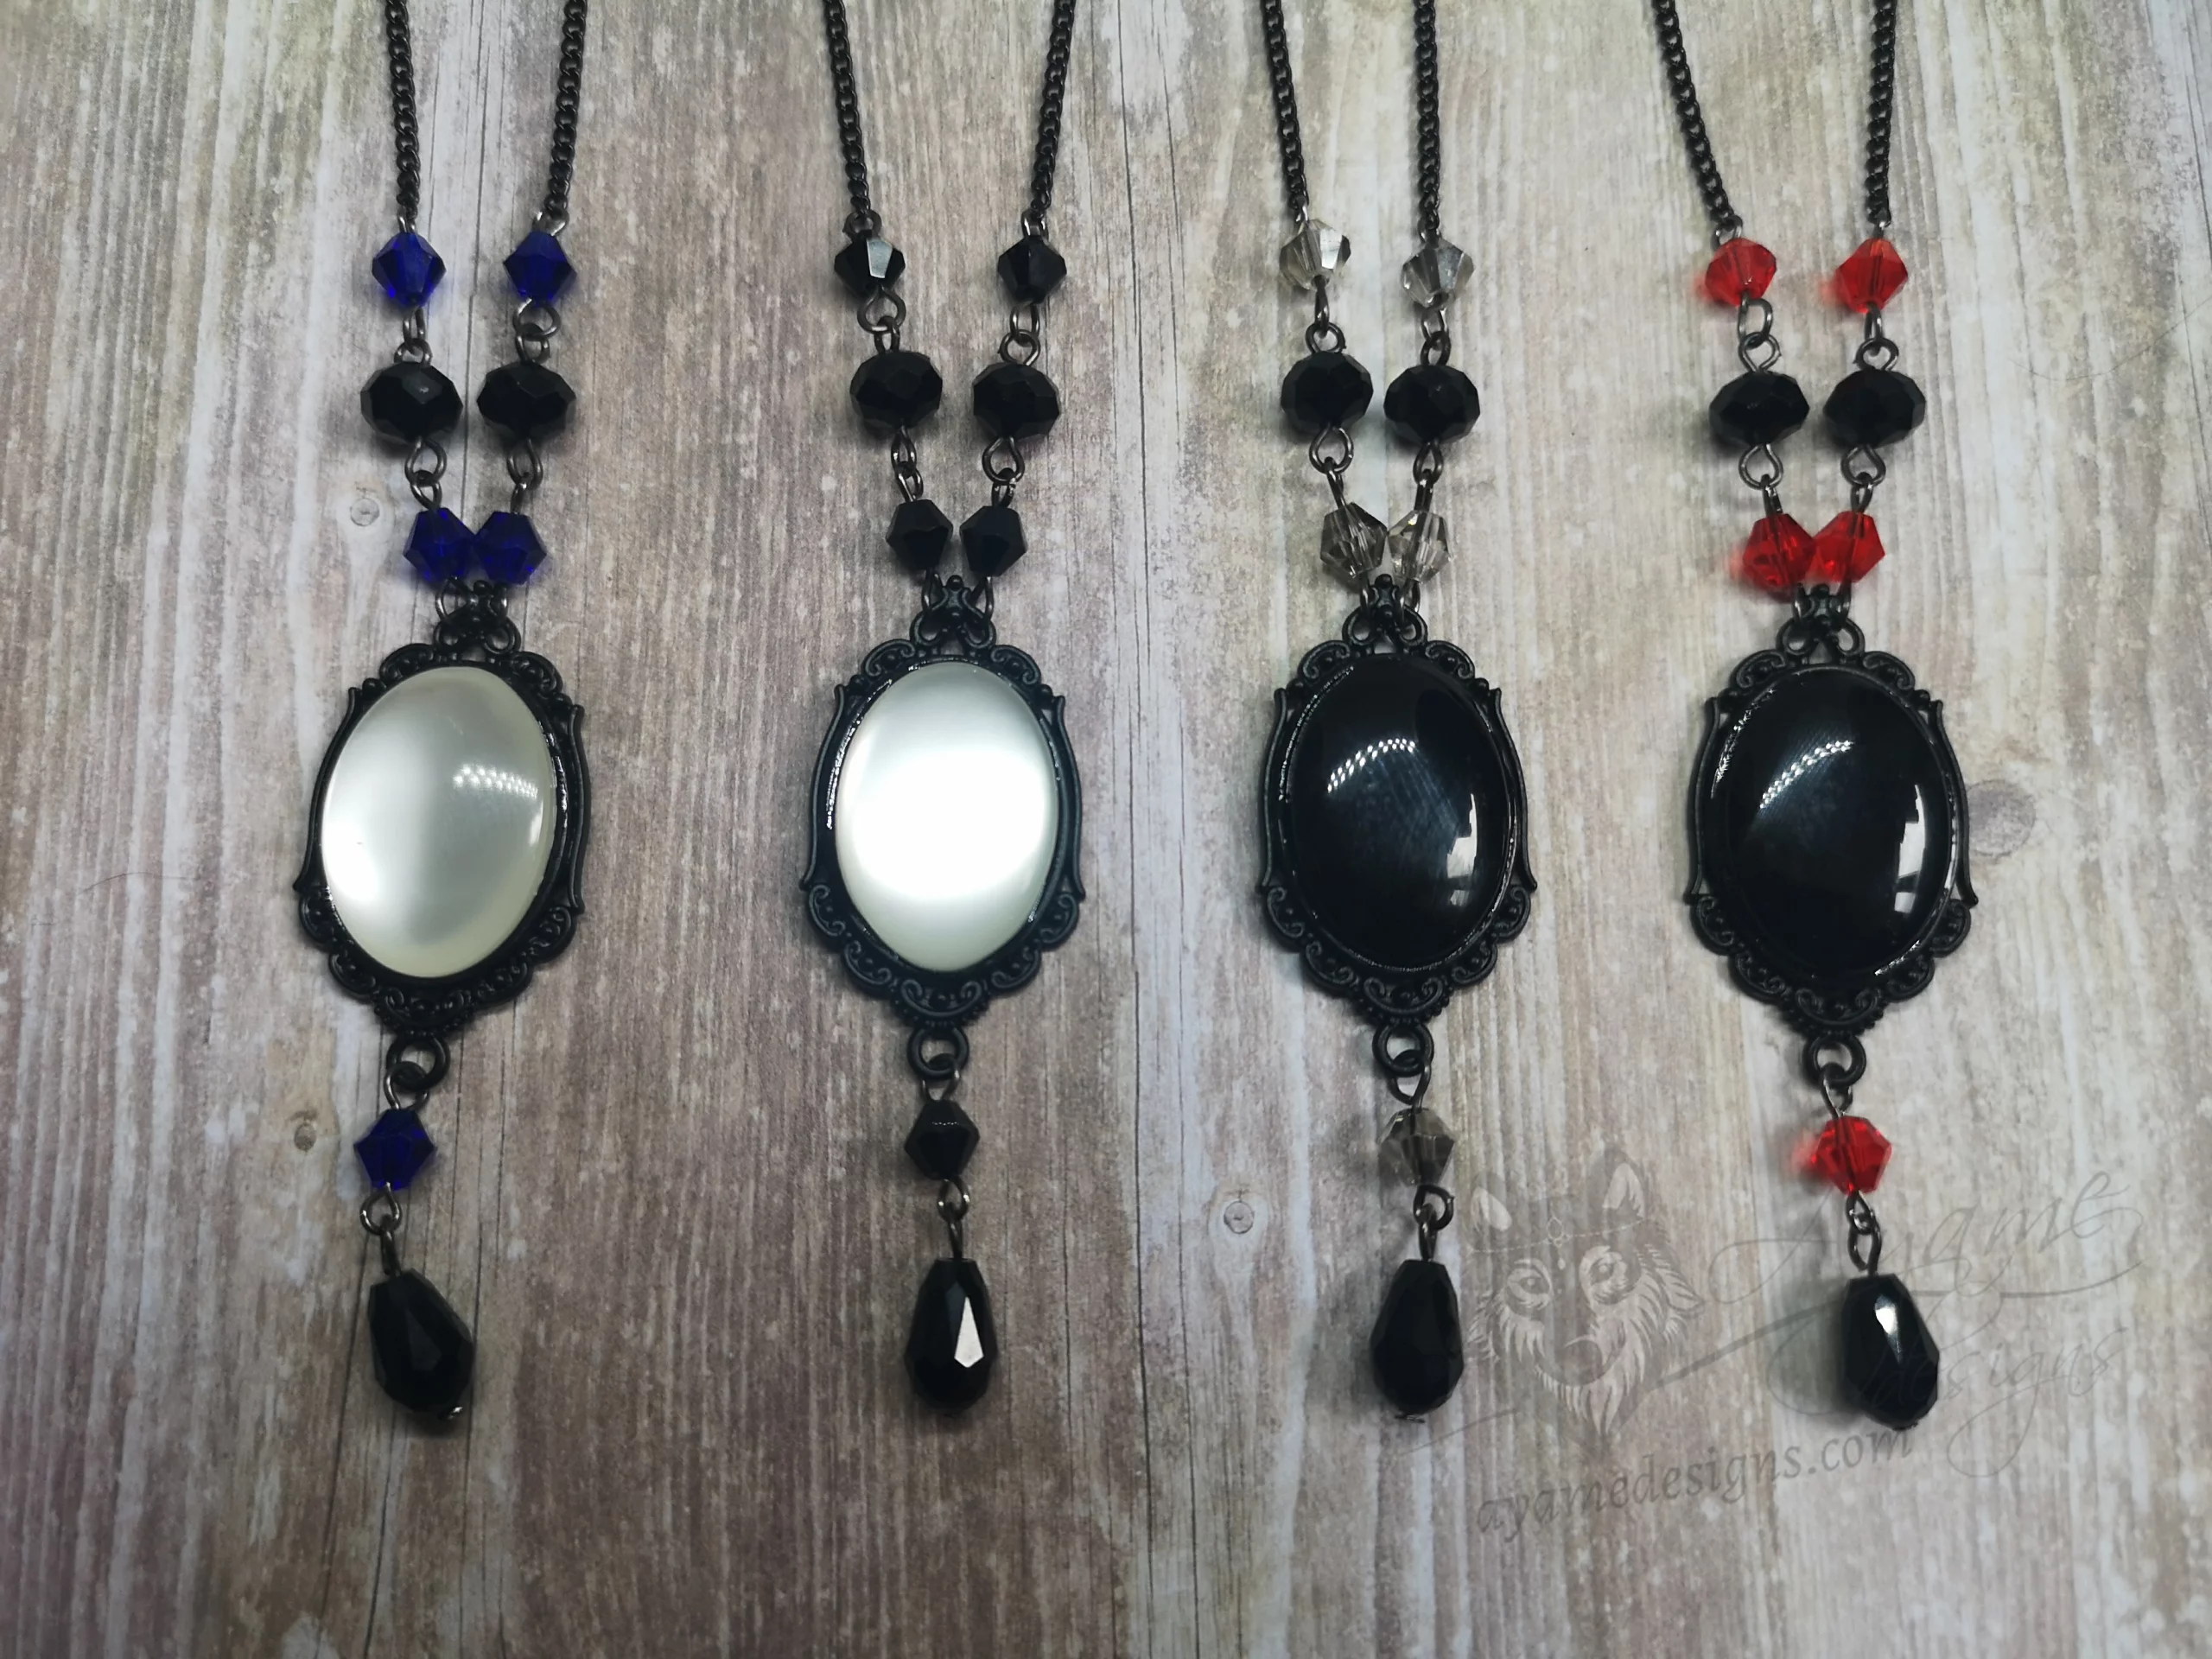 Handmade adjustable gothic necklace with a resin cabochon in a black filigree frame, Austrian crystal beads and black stainless steel chain